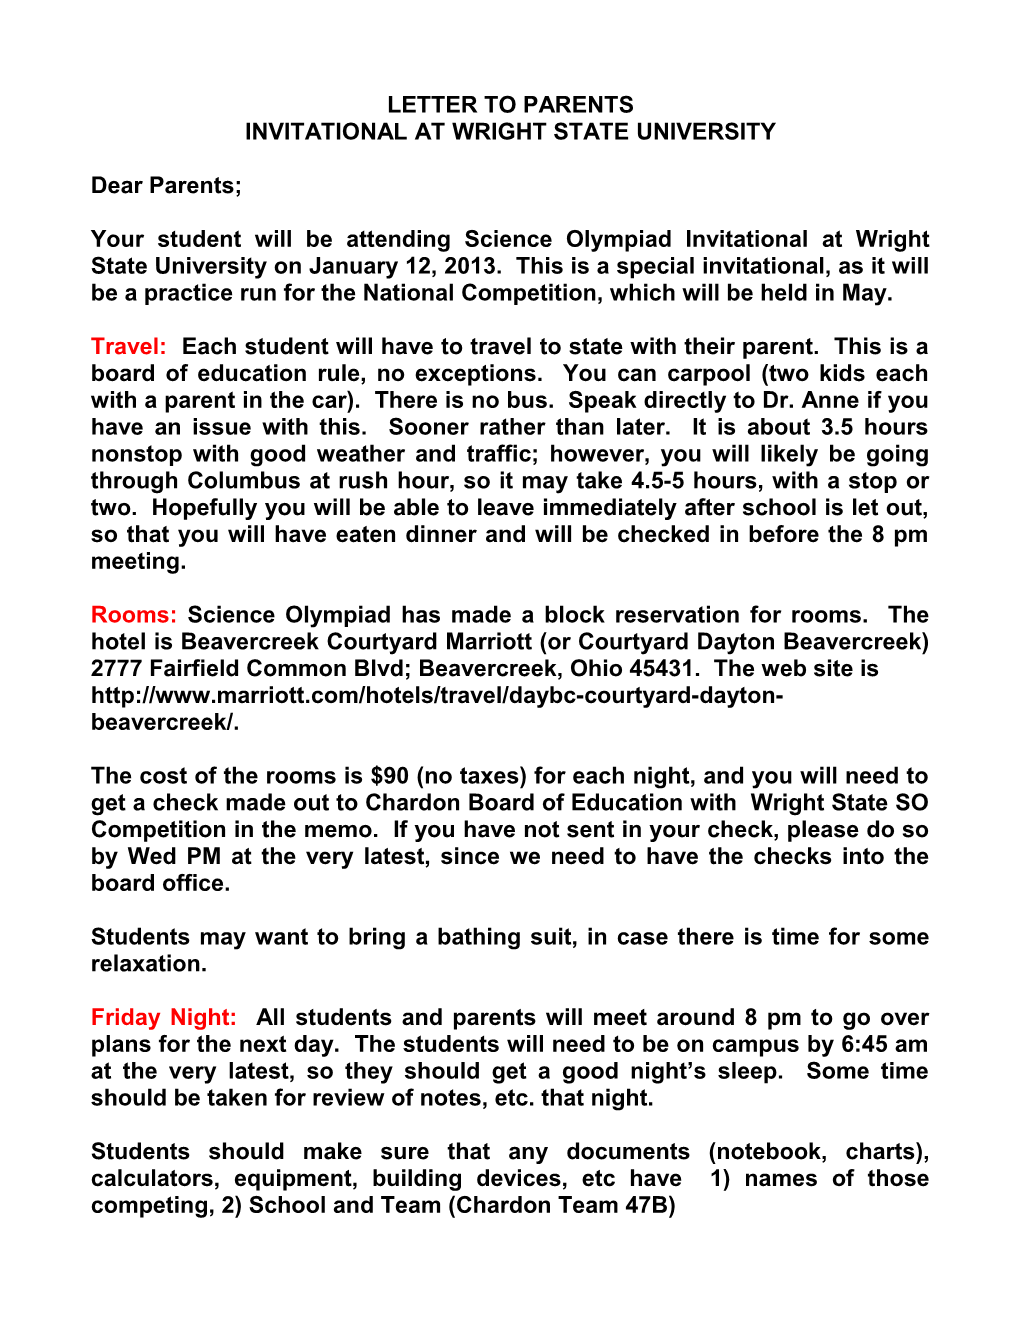 Letter to Parents Ohio State Finals